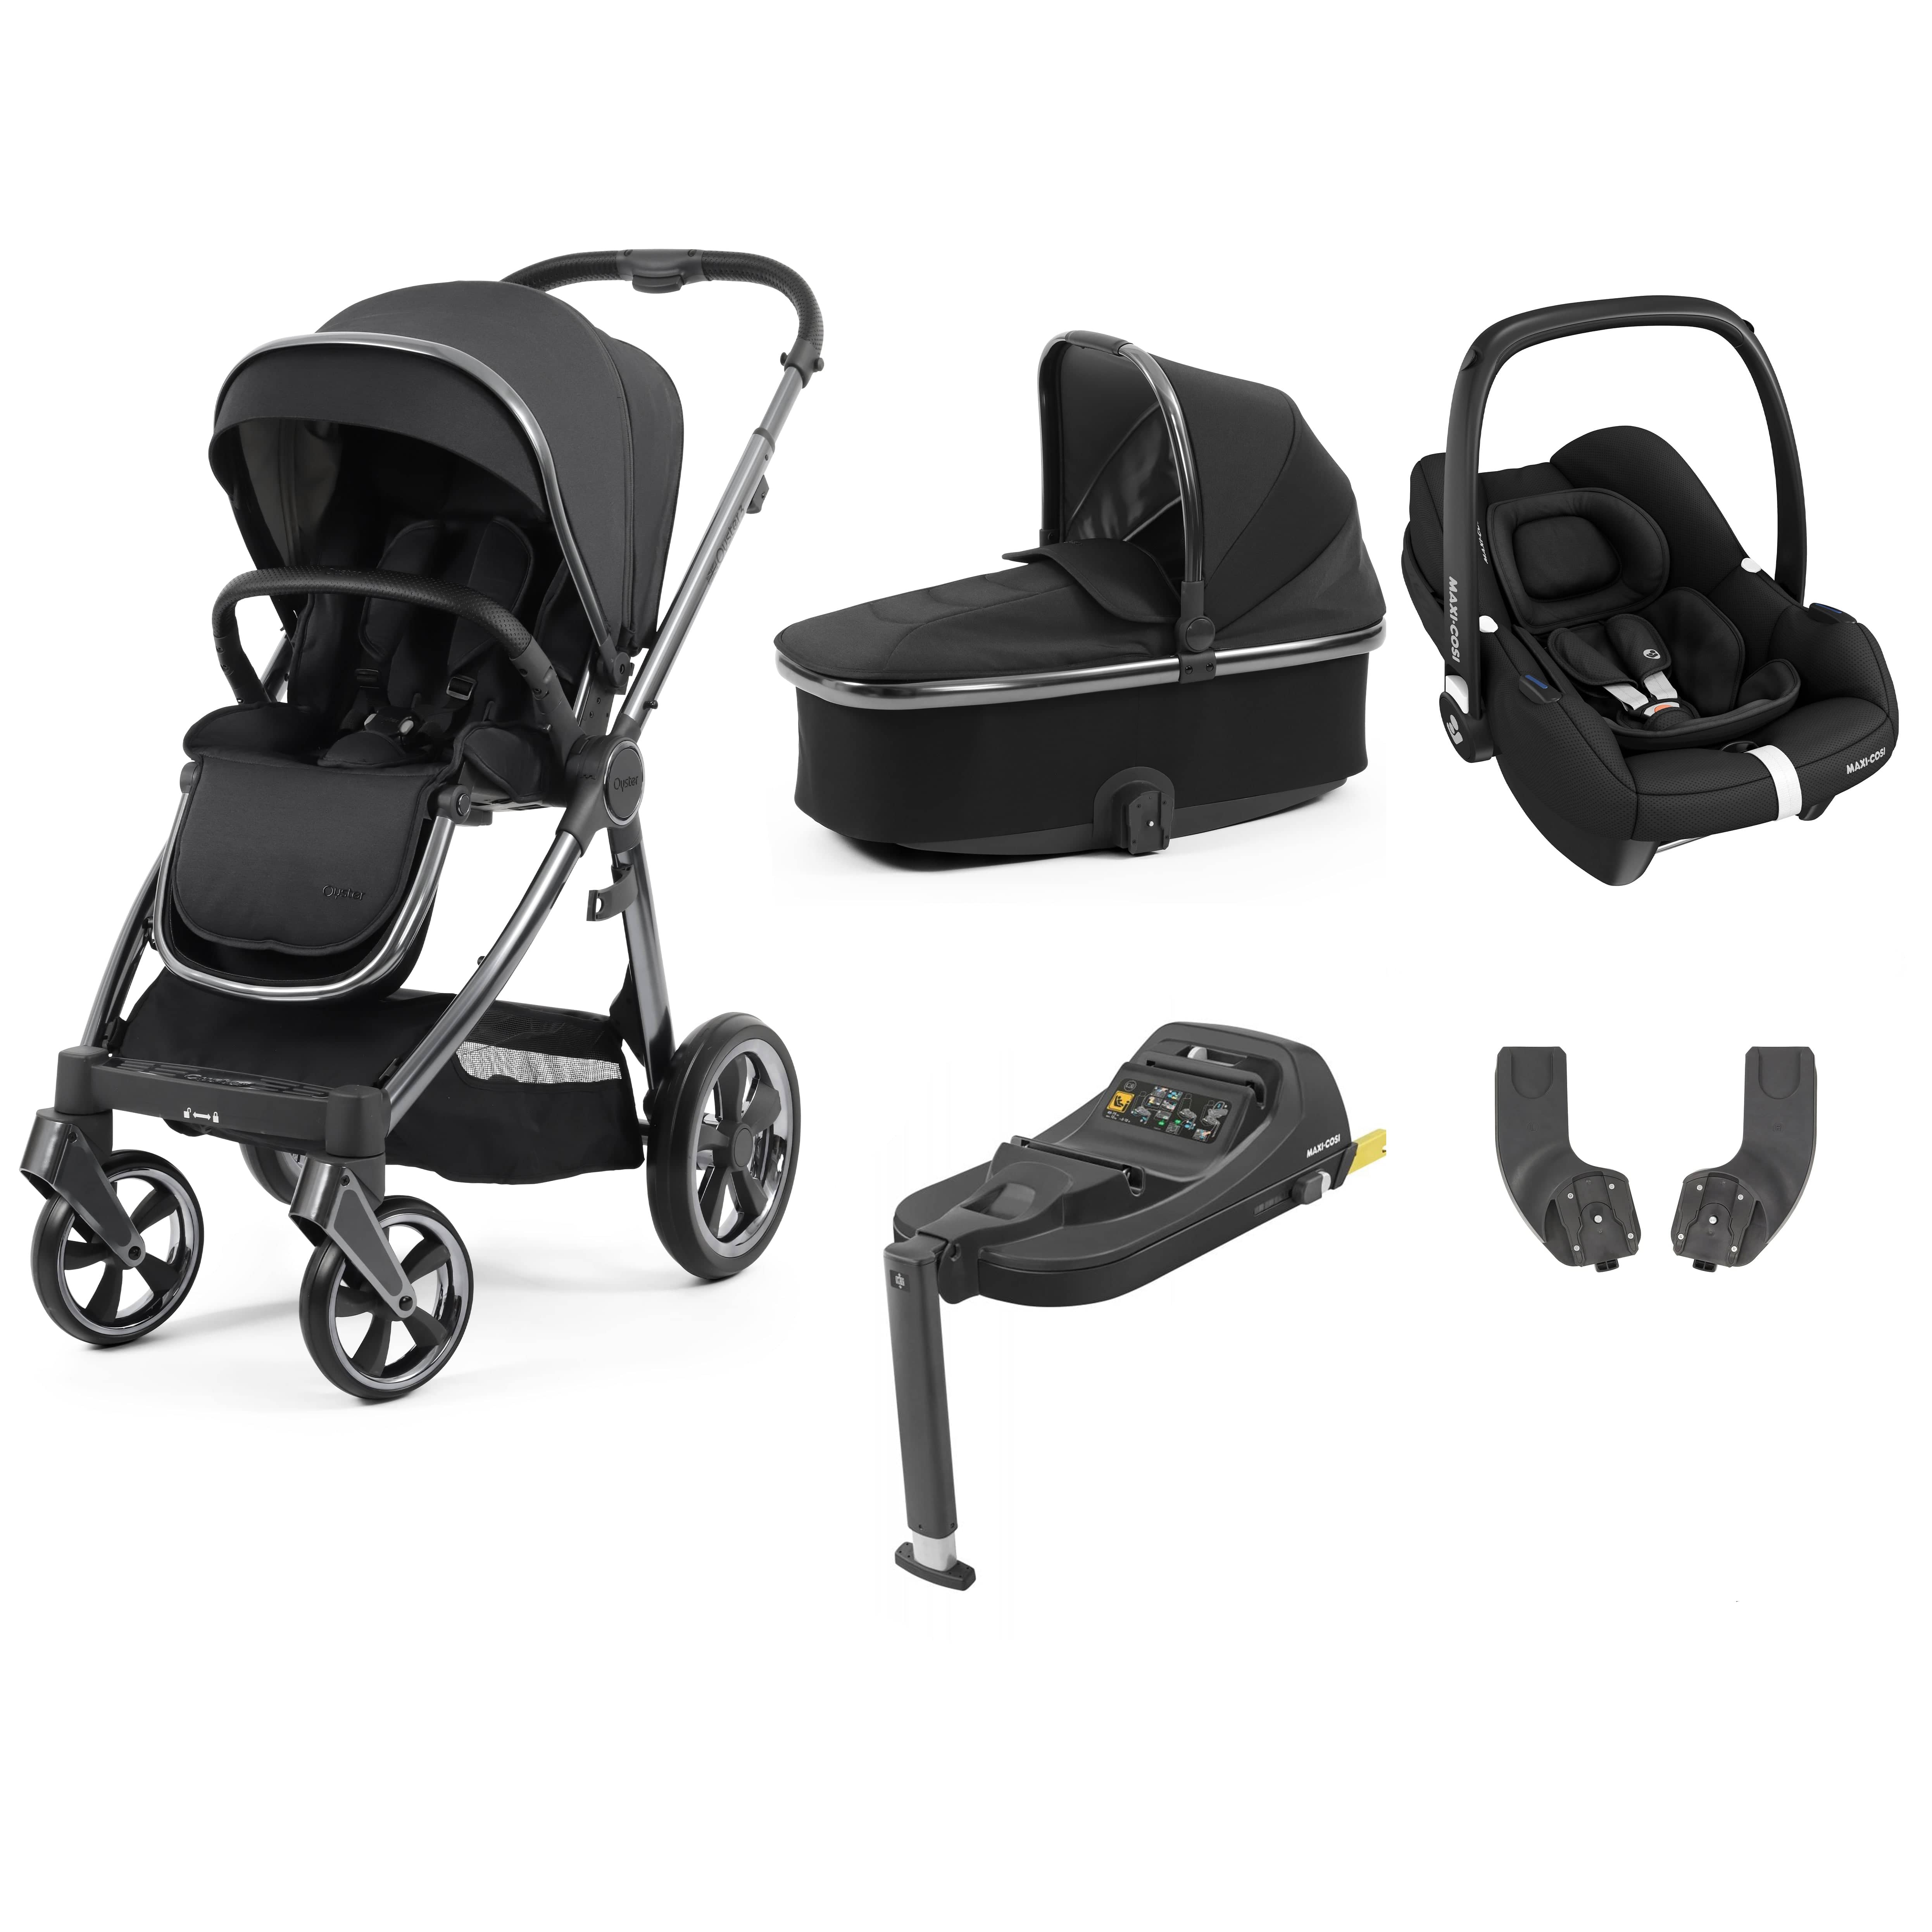 Babystyle Oyster 3 Essential Bundle with Car Seat in Carbonite Travel Systems 14764-CRB 5060711567242